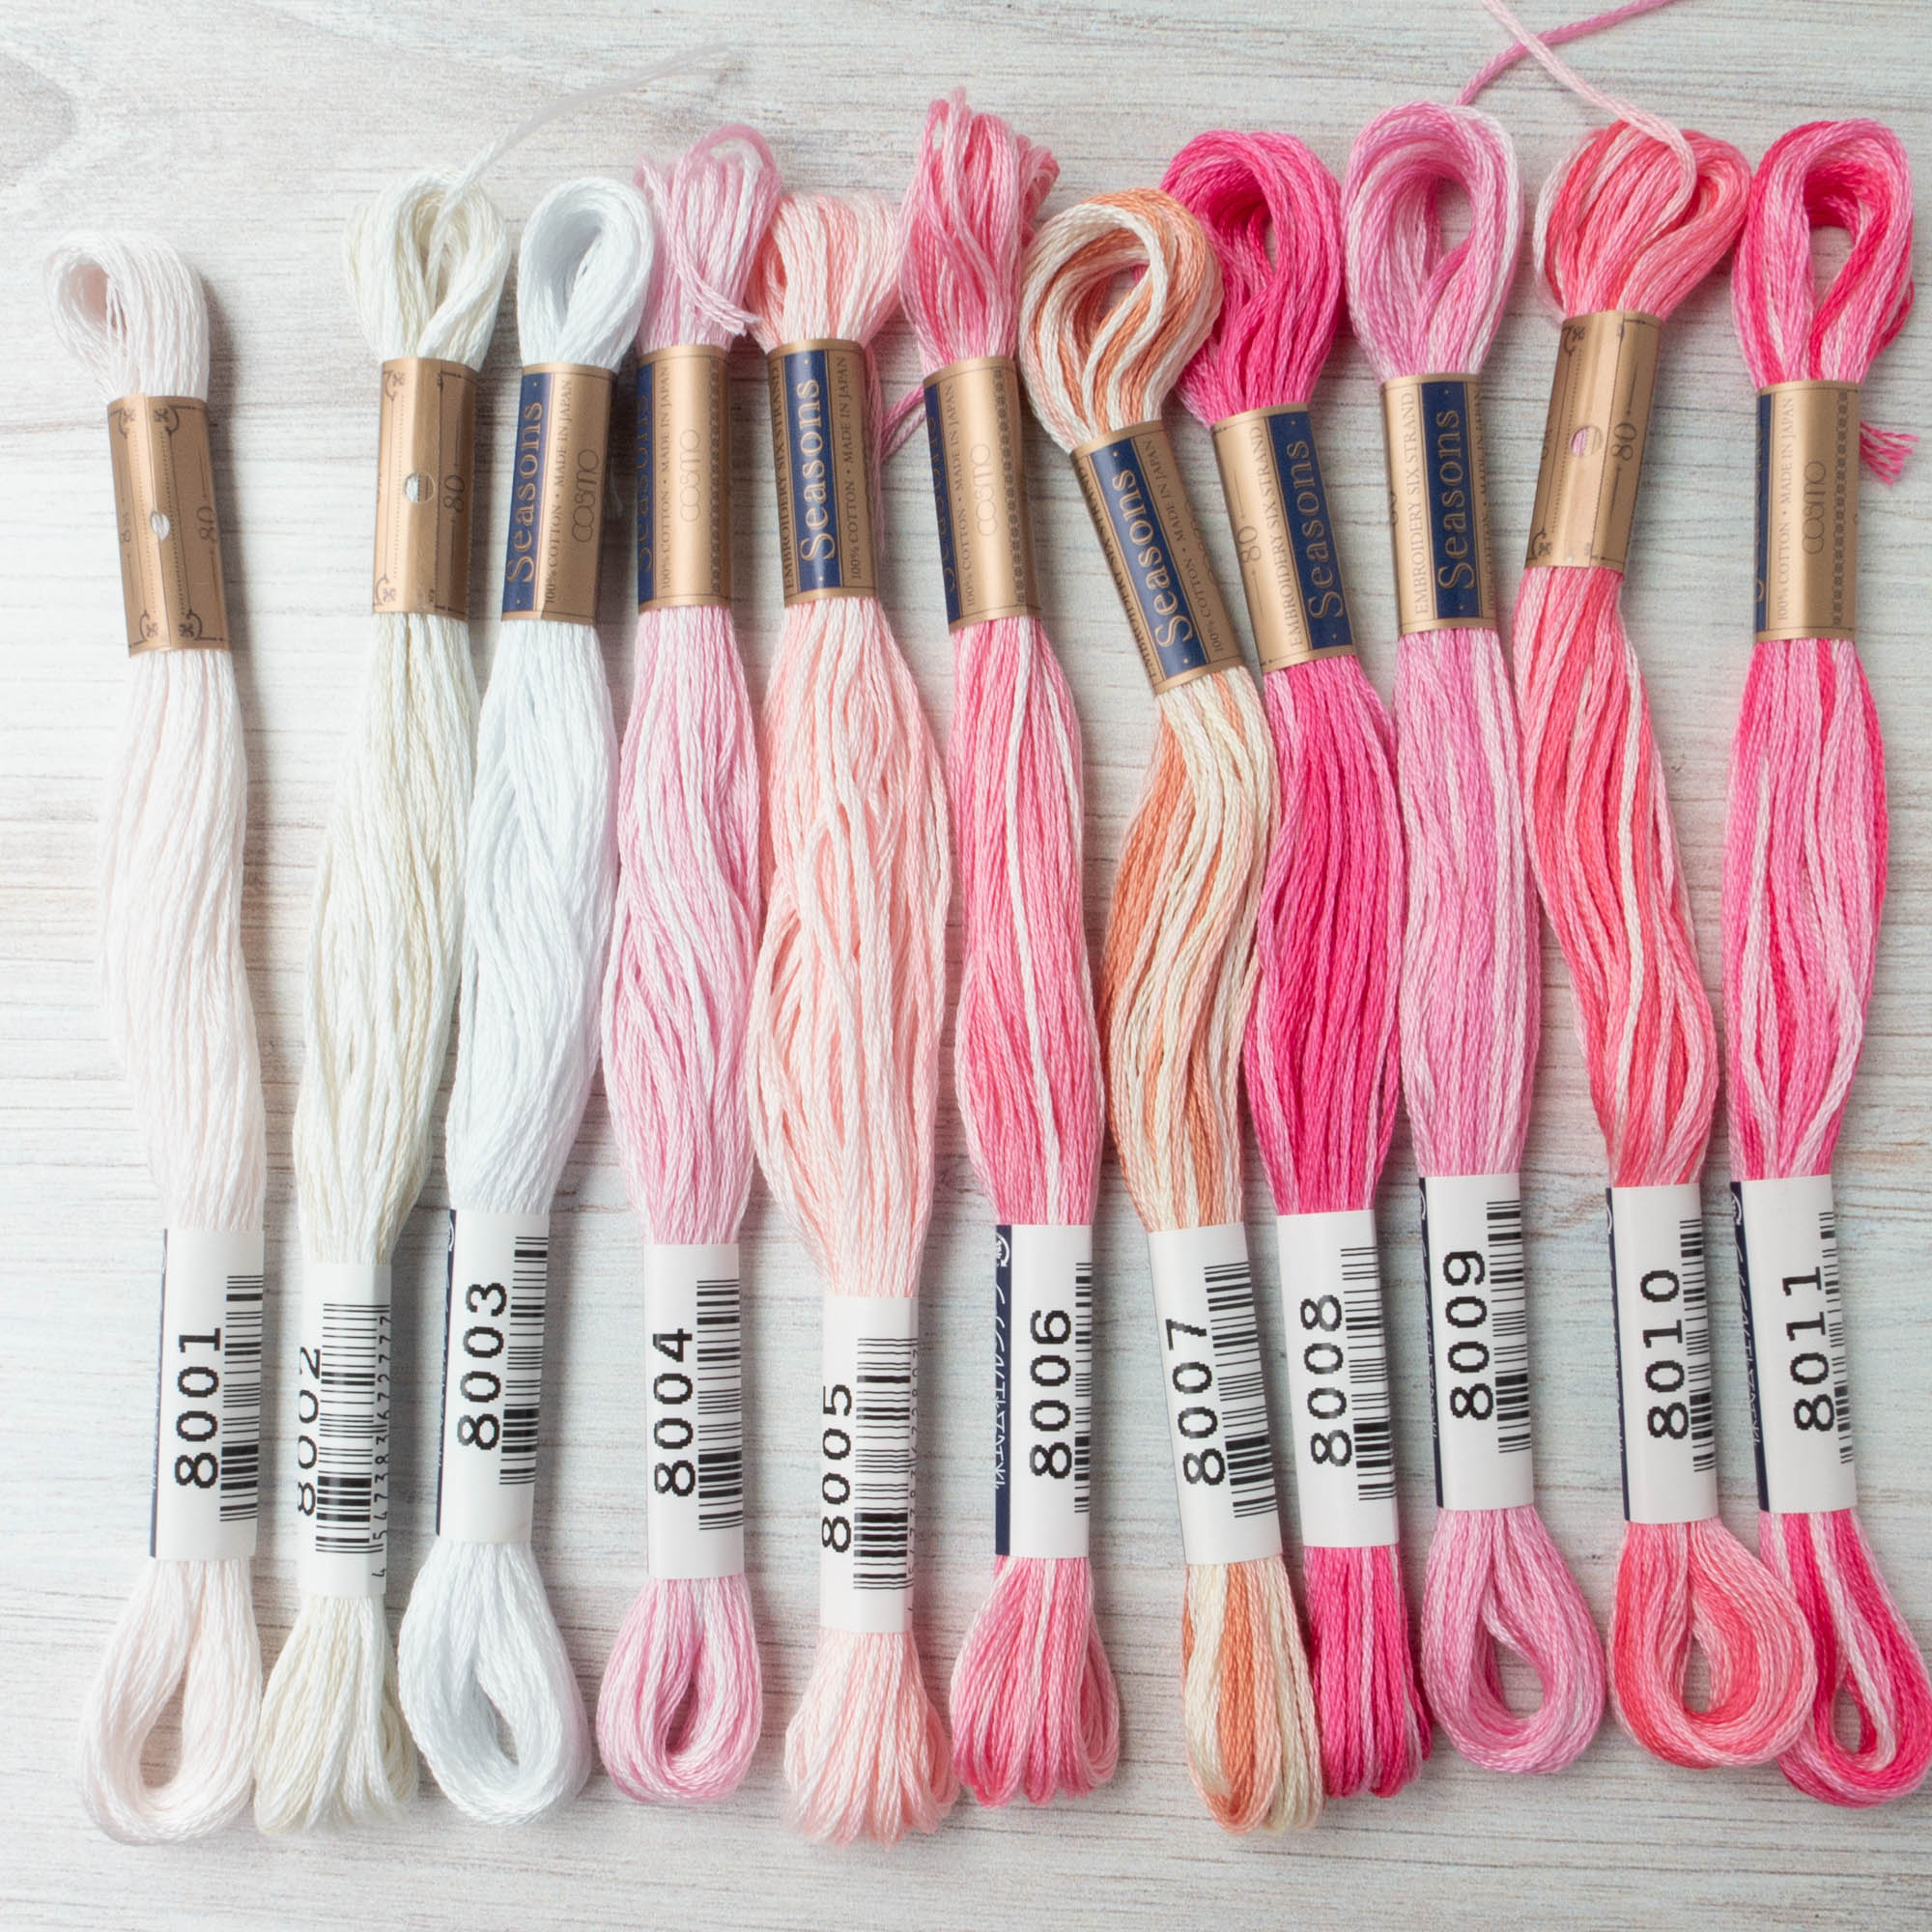 Cosmo Seasons Variegated Embroidery Floss Pinks/Cream - 4547383672821